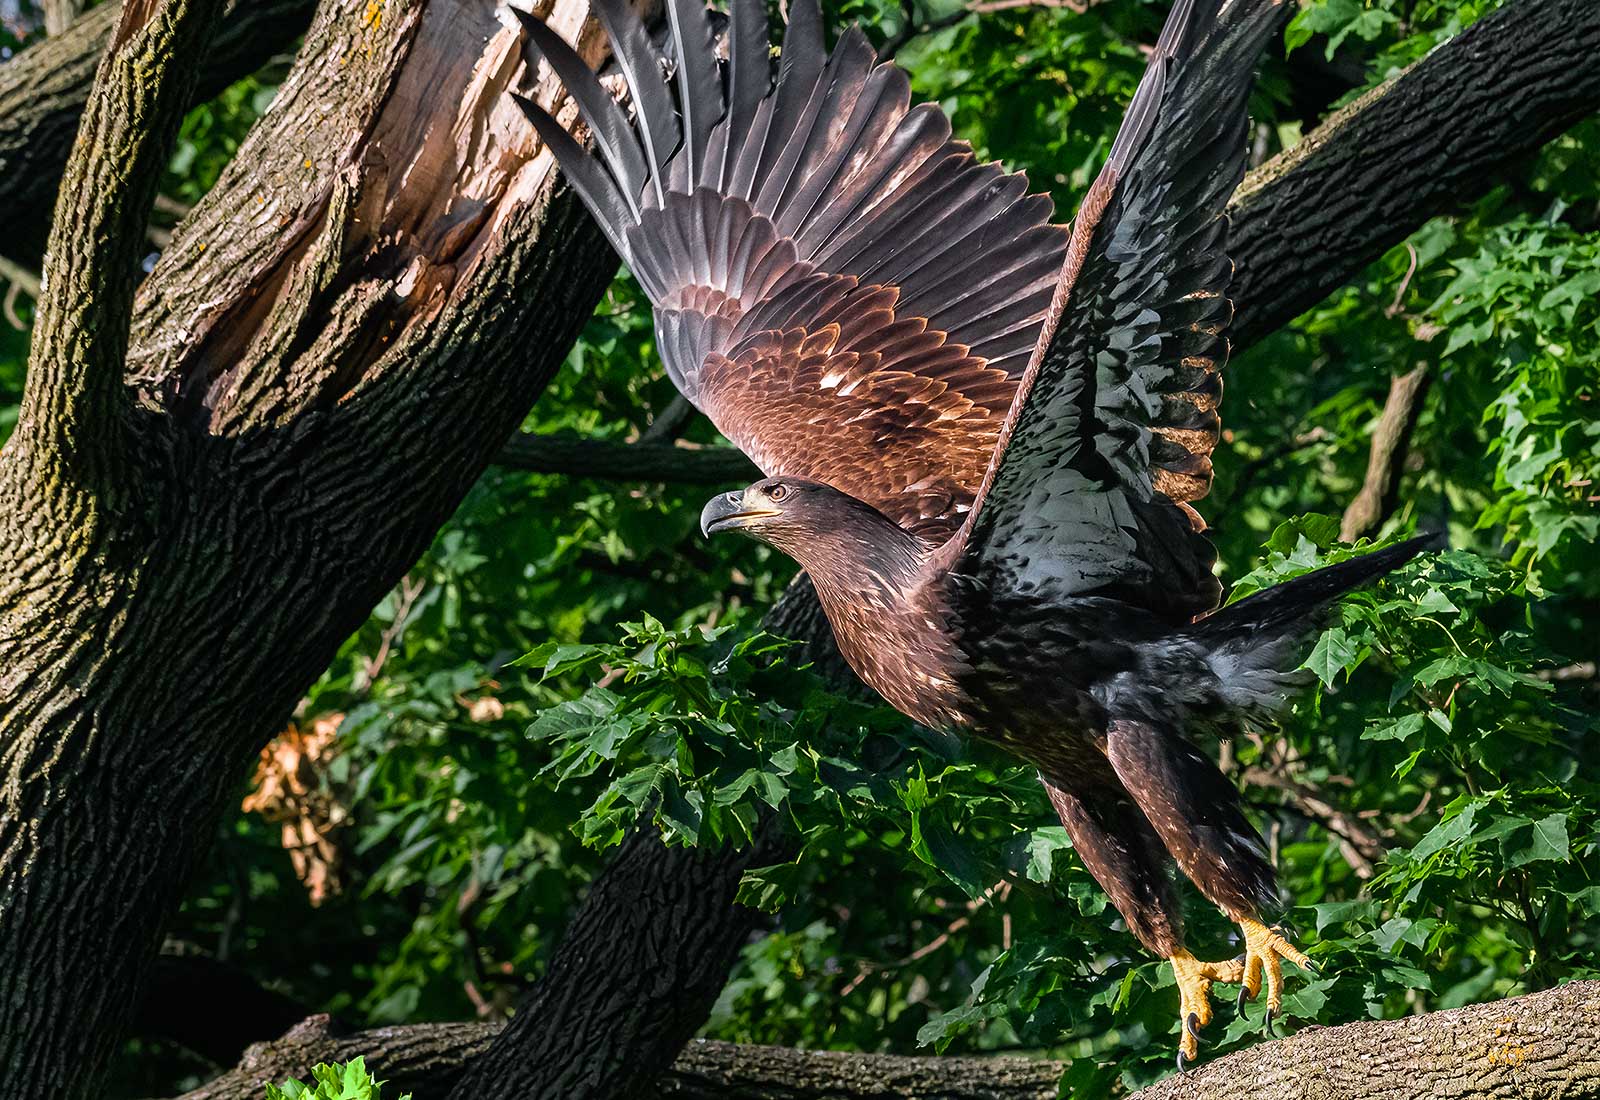 Juvenile Eagle takes off from a branch